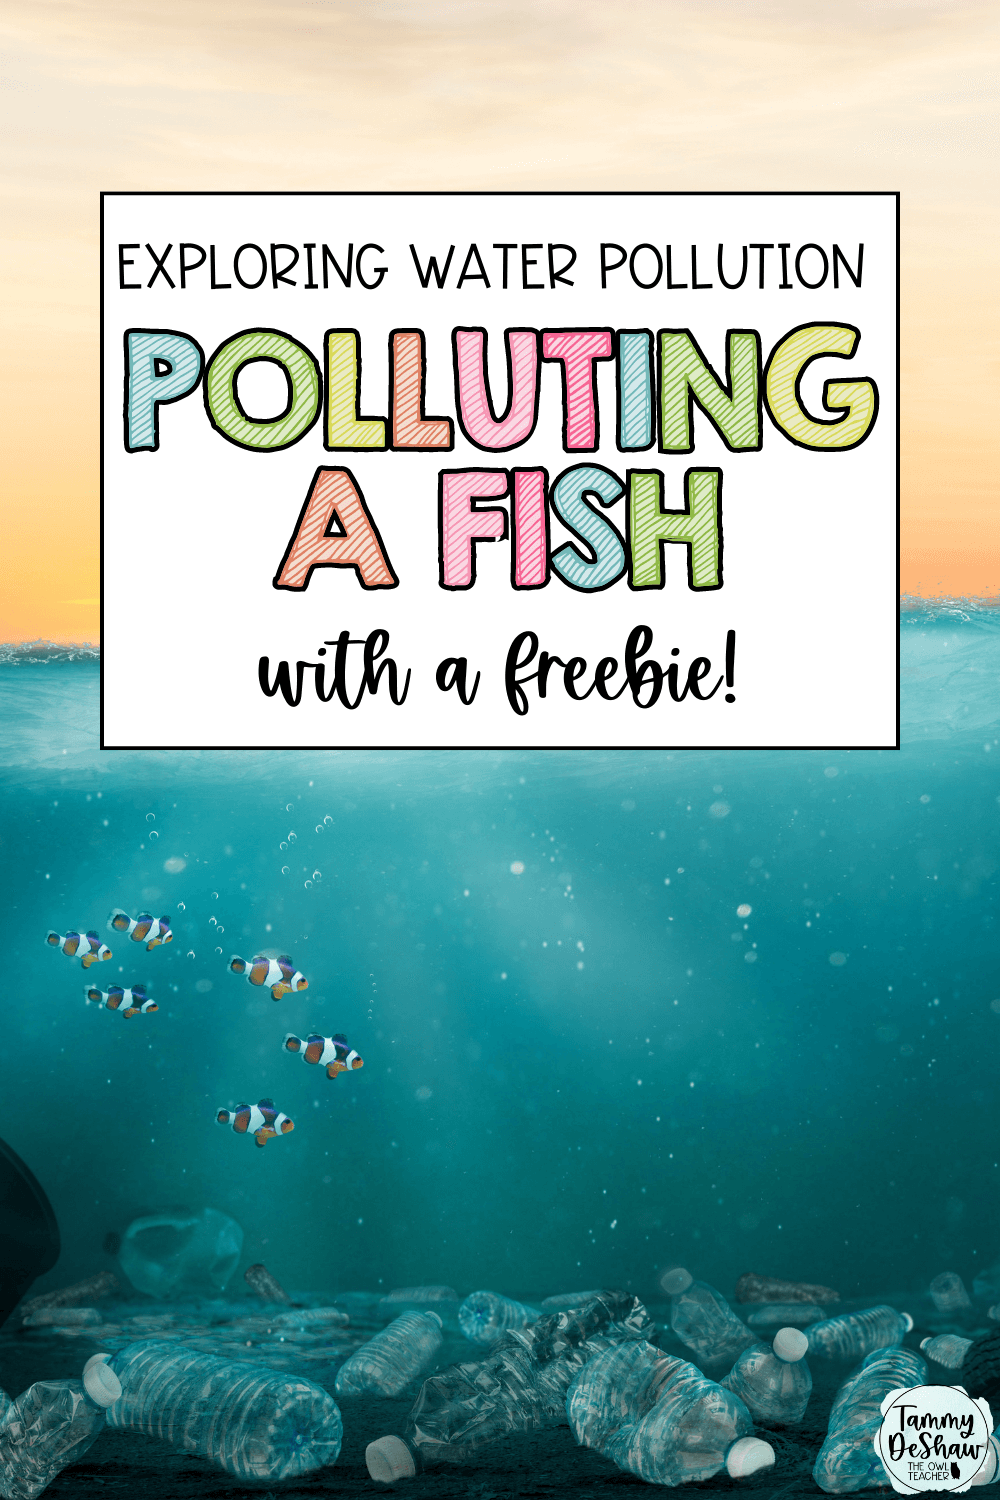 Teaching science is a fun and engaging activity with this science experiment! Check out this idea on how to help students explore pollution for Earth Day or any science lesson! via @deshawtammygmail.com